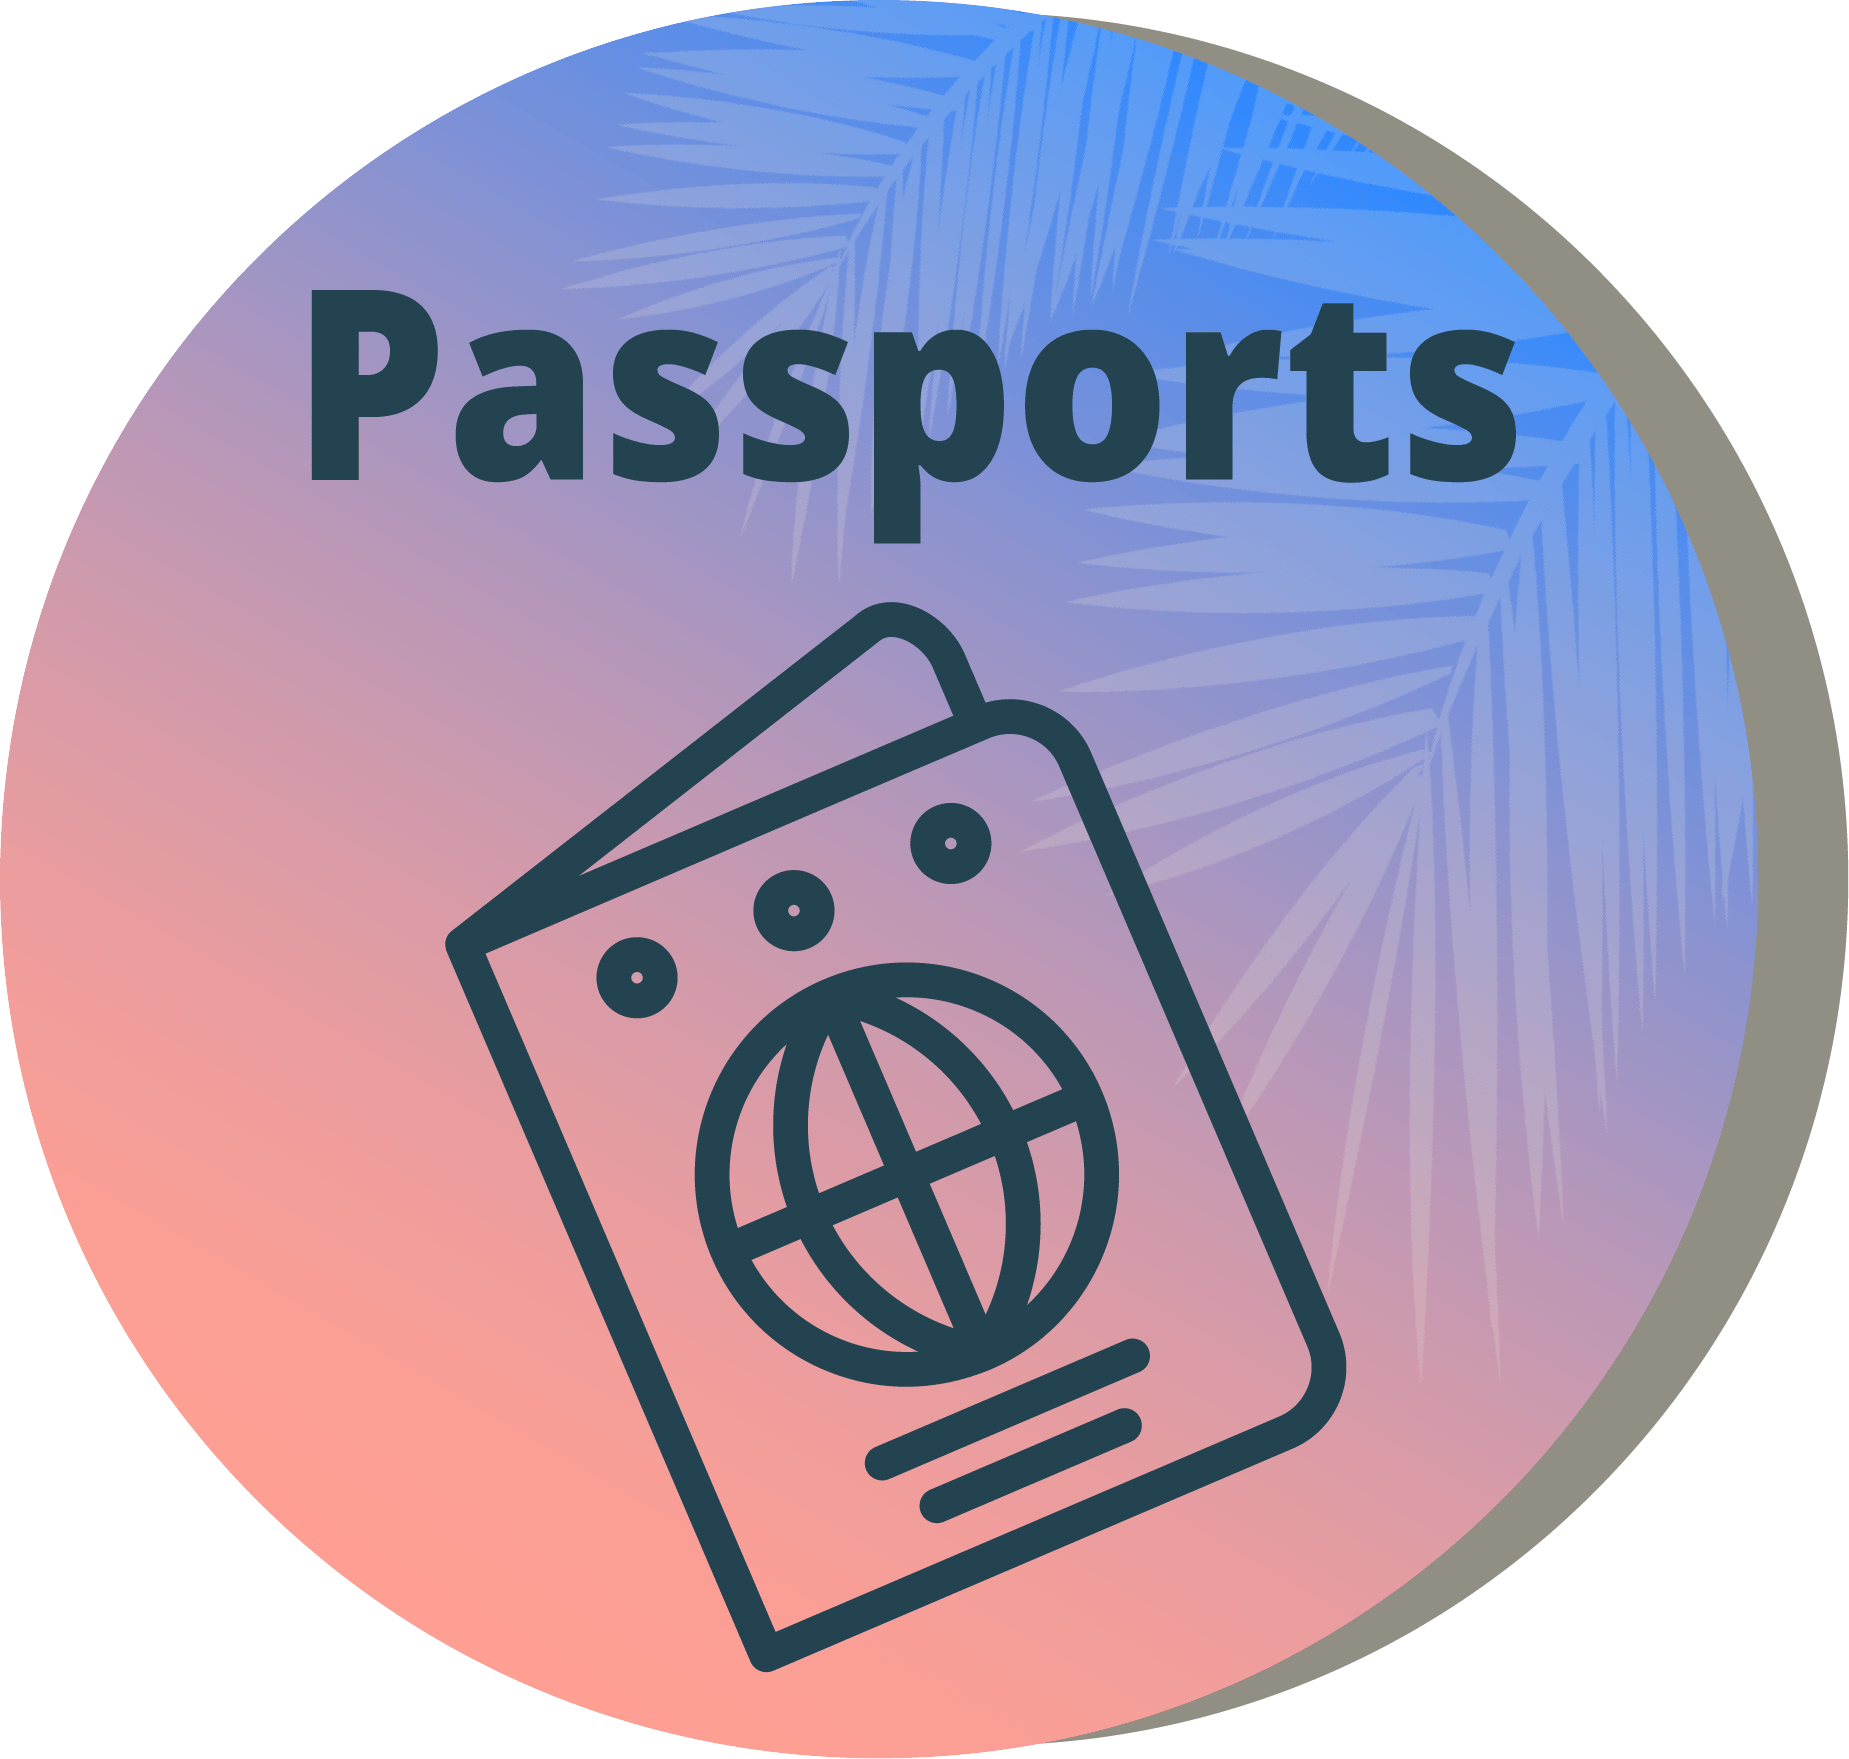 Access Information on our Passport Service